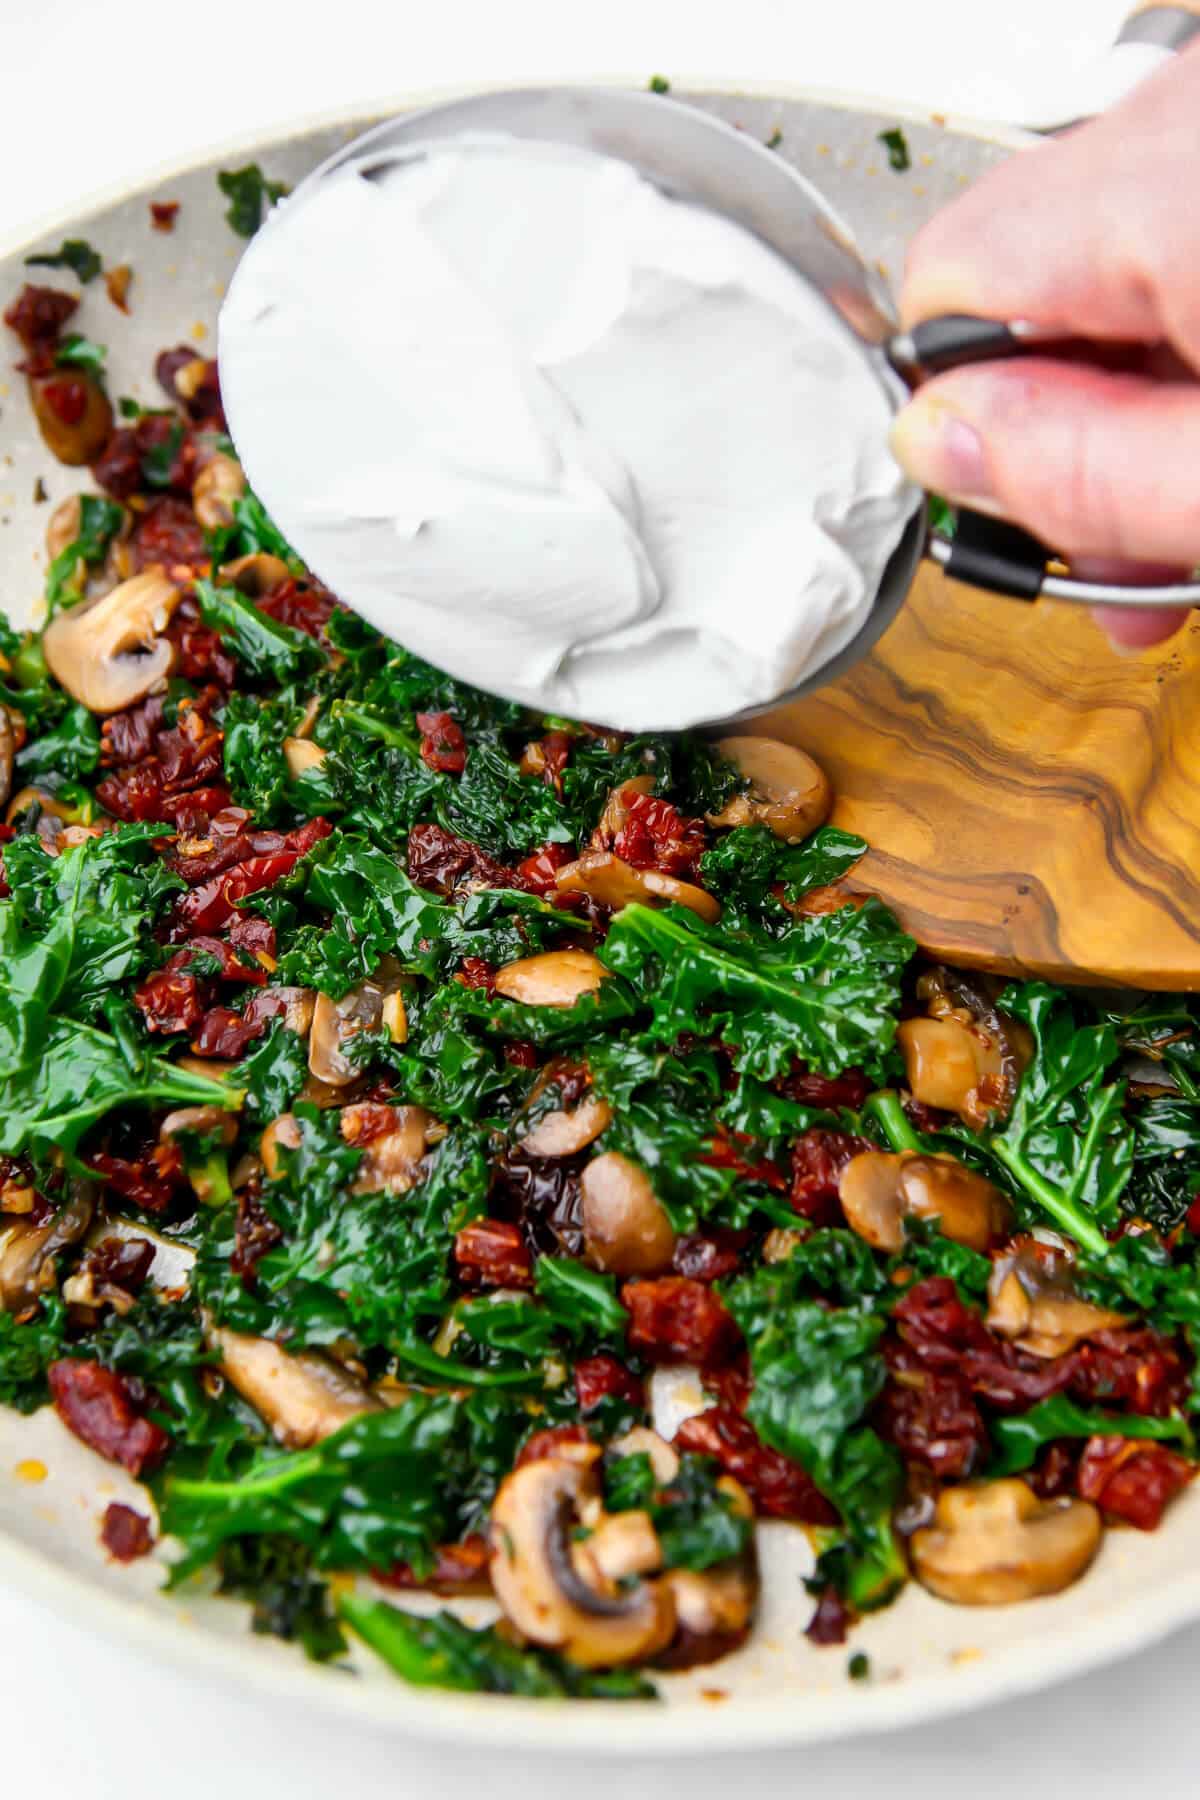 Sautéed mushrooms, kale, and sundried tomatoes with a scoop of cream being added.